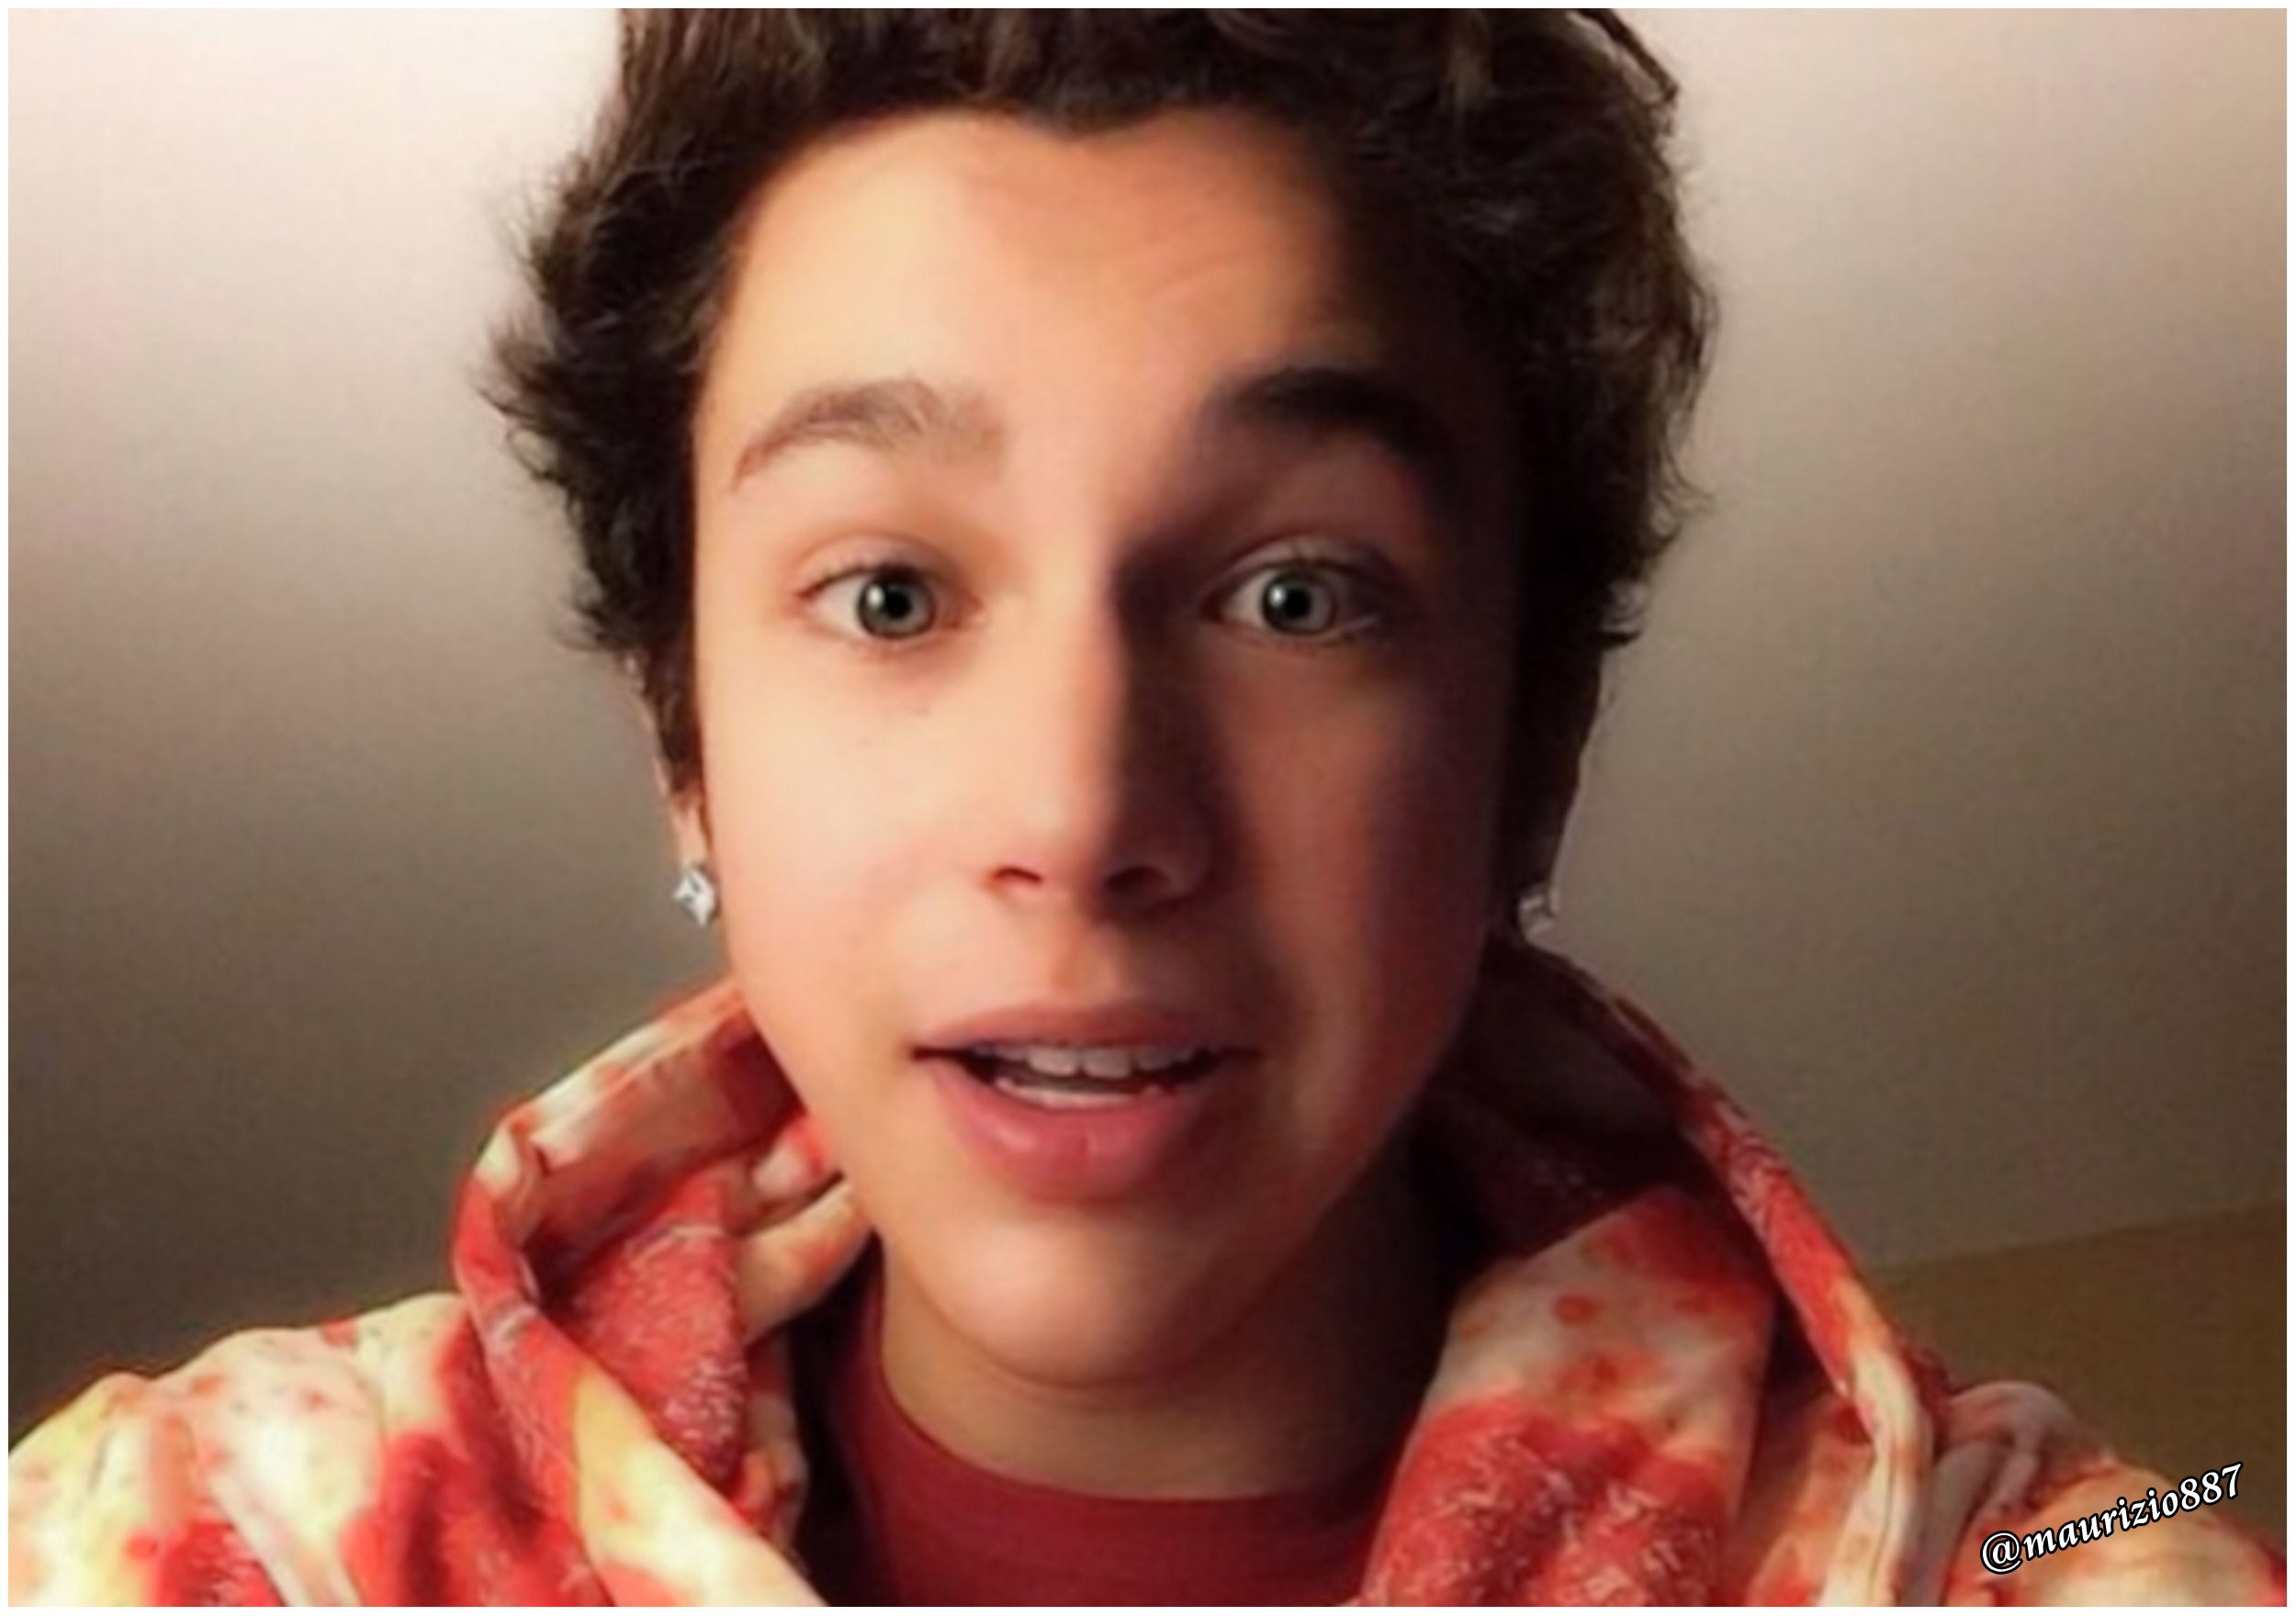 Austin Mahone Image HD Wallpaper And Background